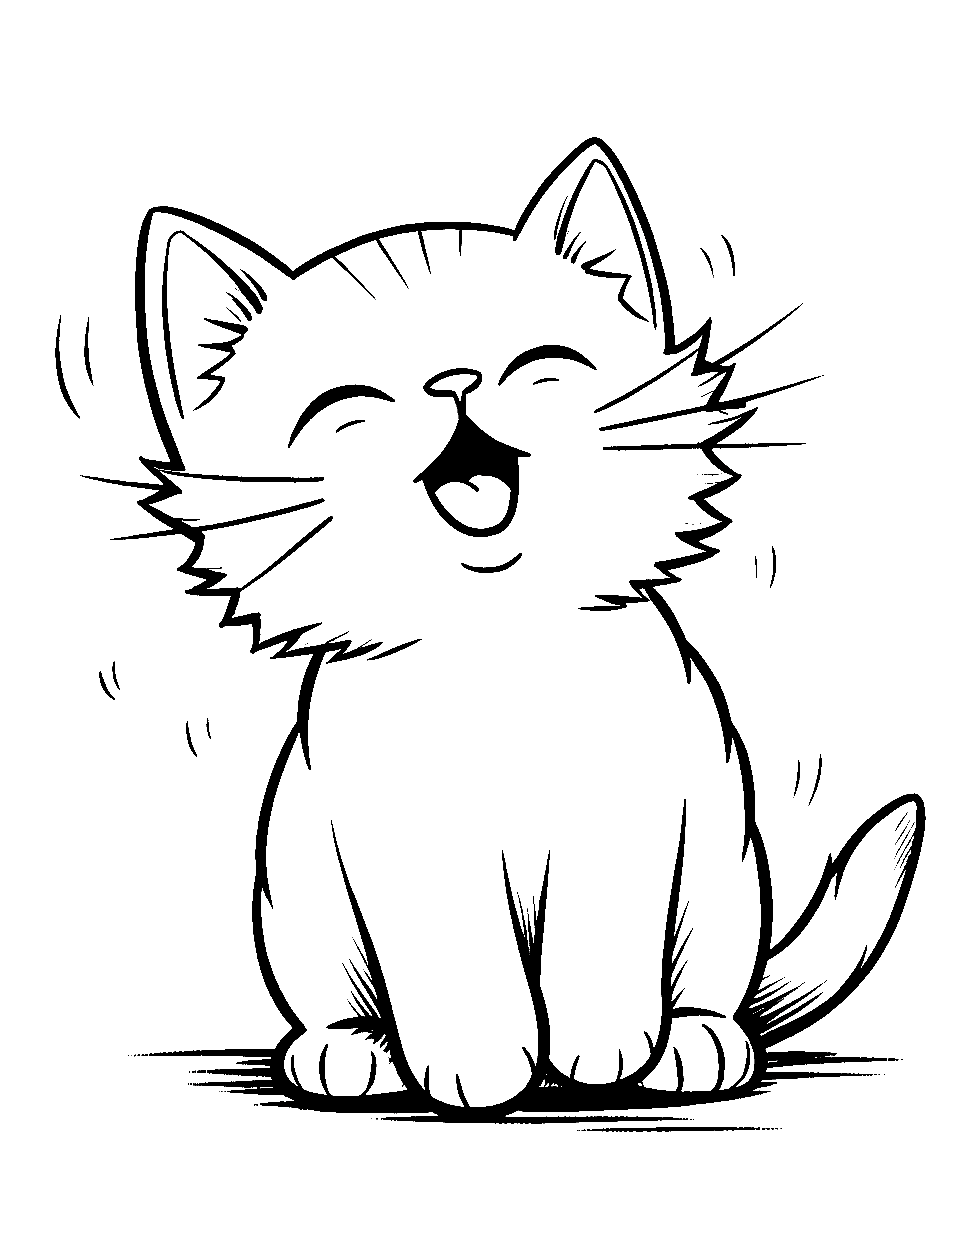 Kitten coloring pages free printable sheets